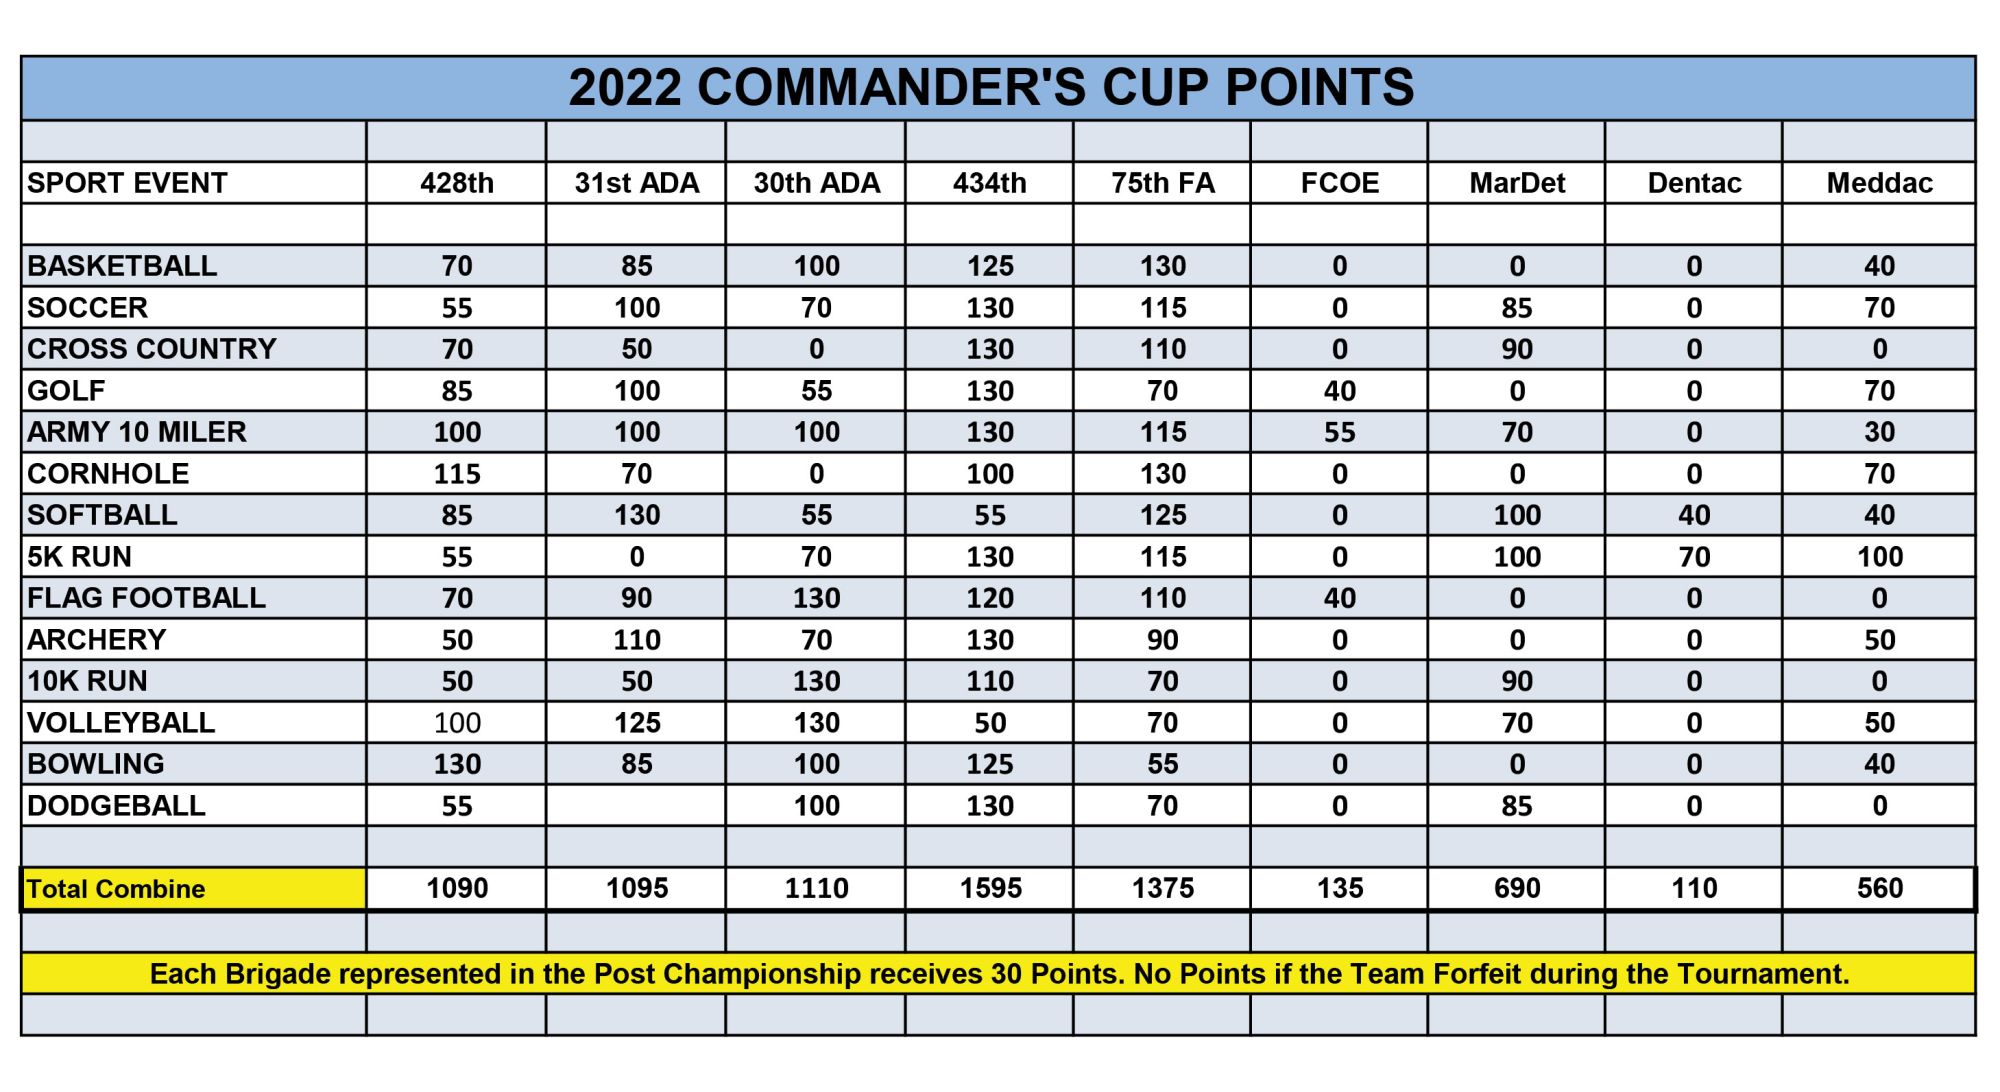 Sill-IM-Commander-Cup-points-as-of-8-DEC-2022-1.jpg